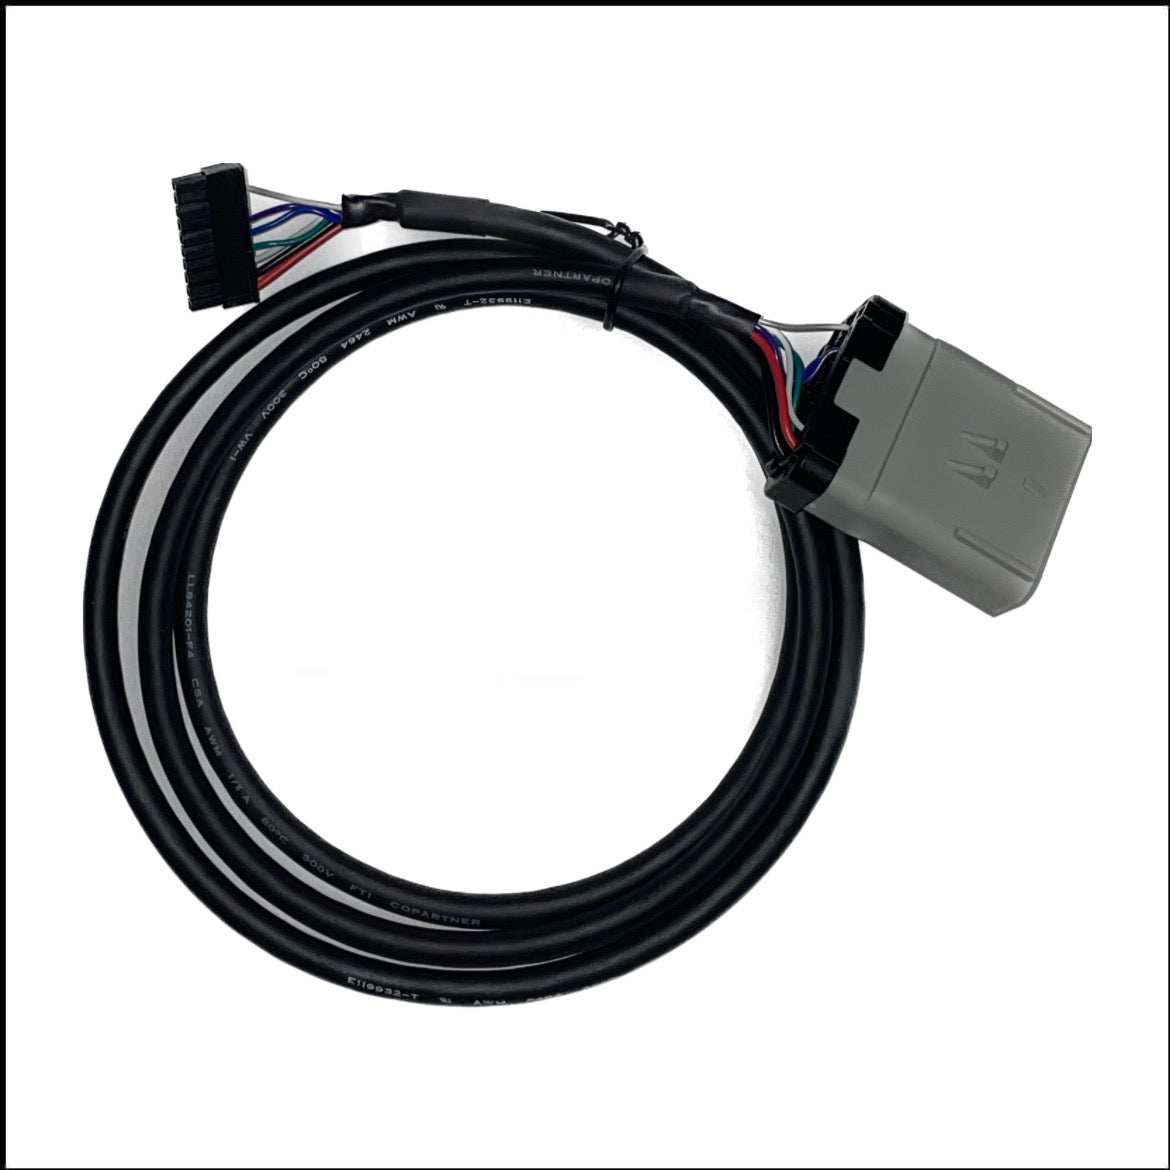 Cable for PT30 HOS ELD Logbook, Compliant ECM w/DOT-Electronic Logging Device, Square Gray Orange Volvo Panel Connector Cable, PTSS122615